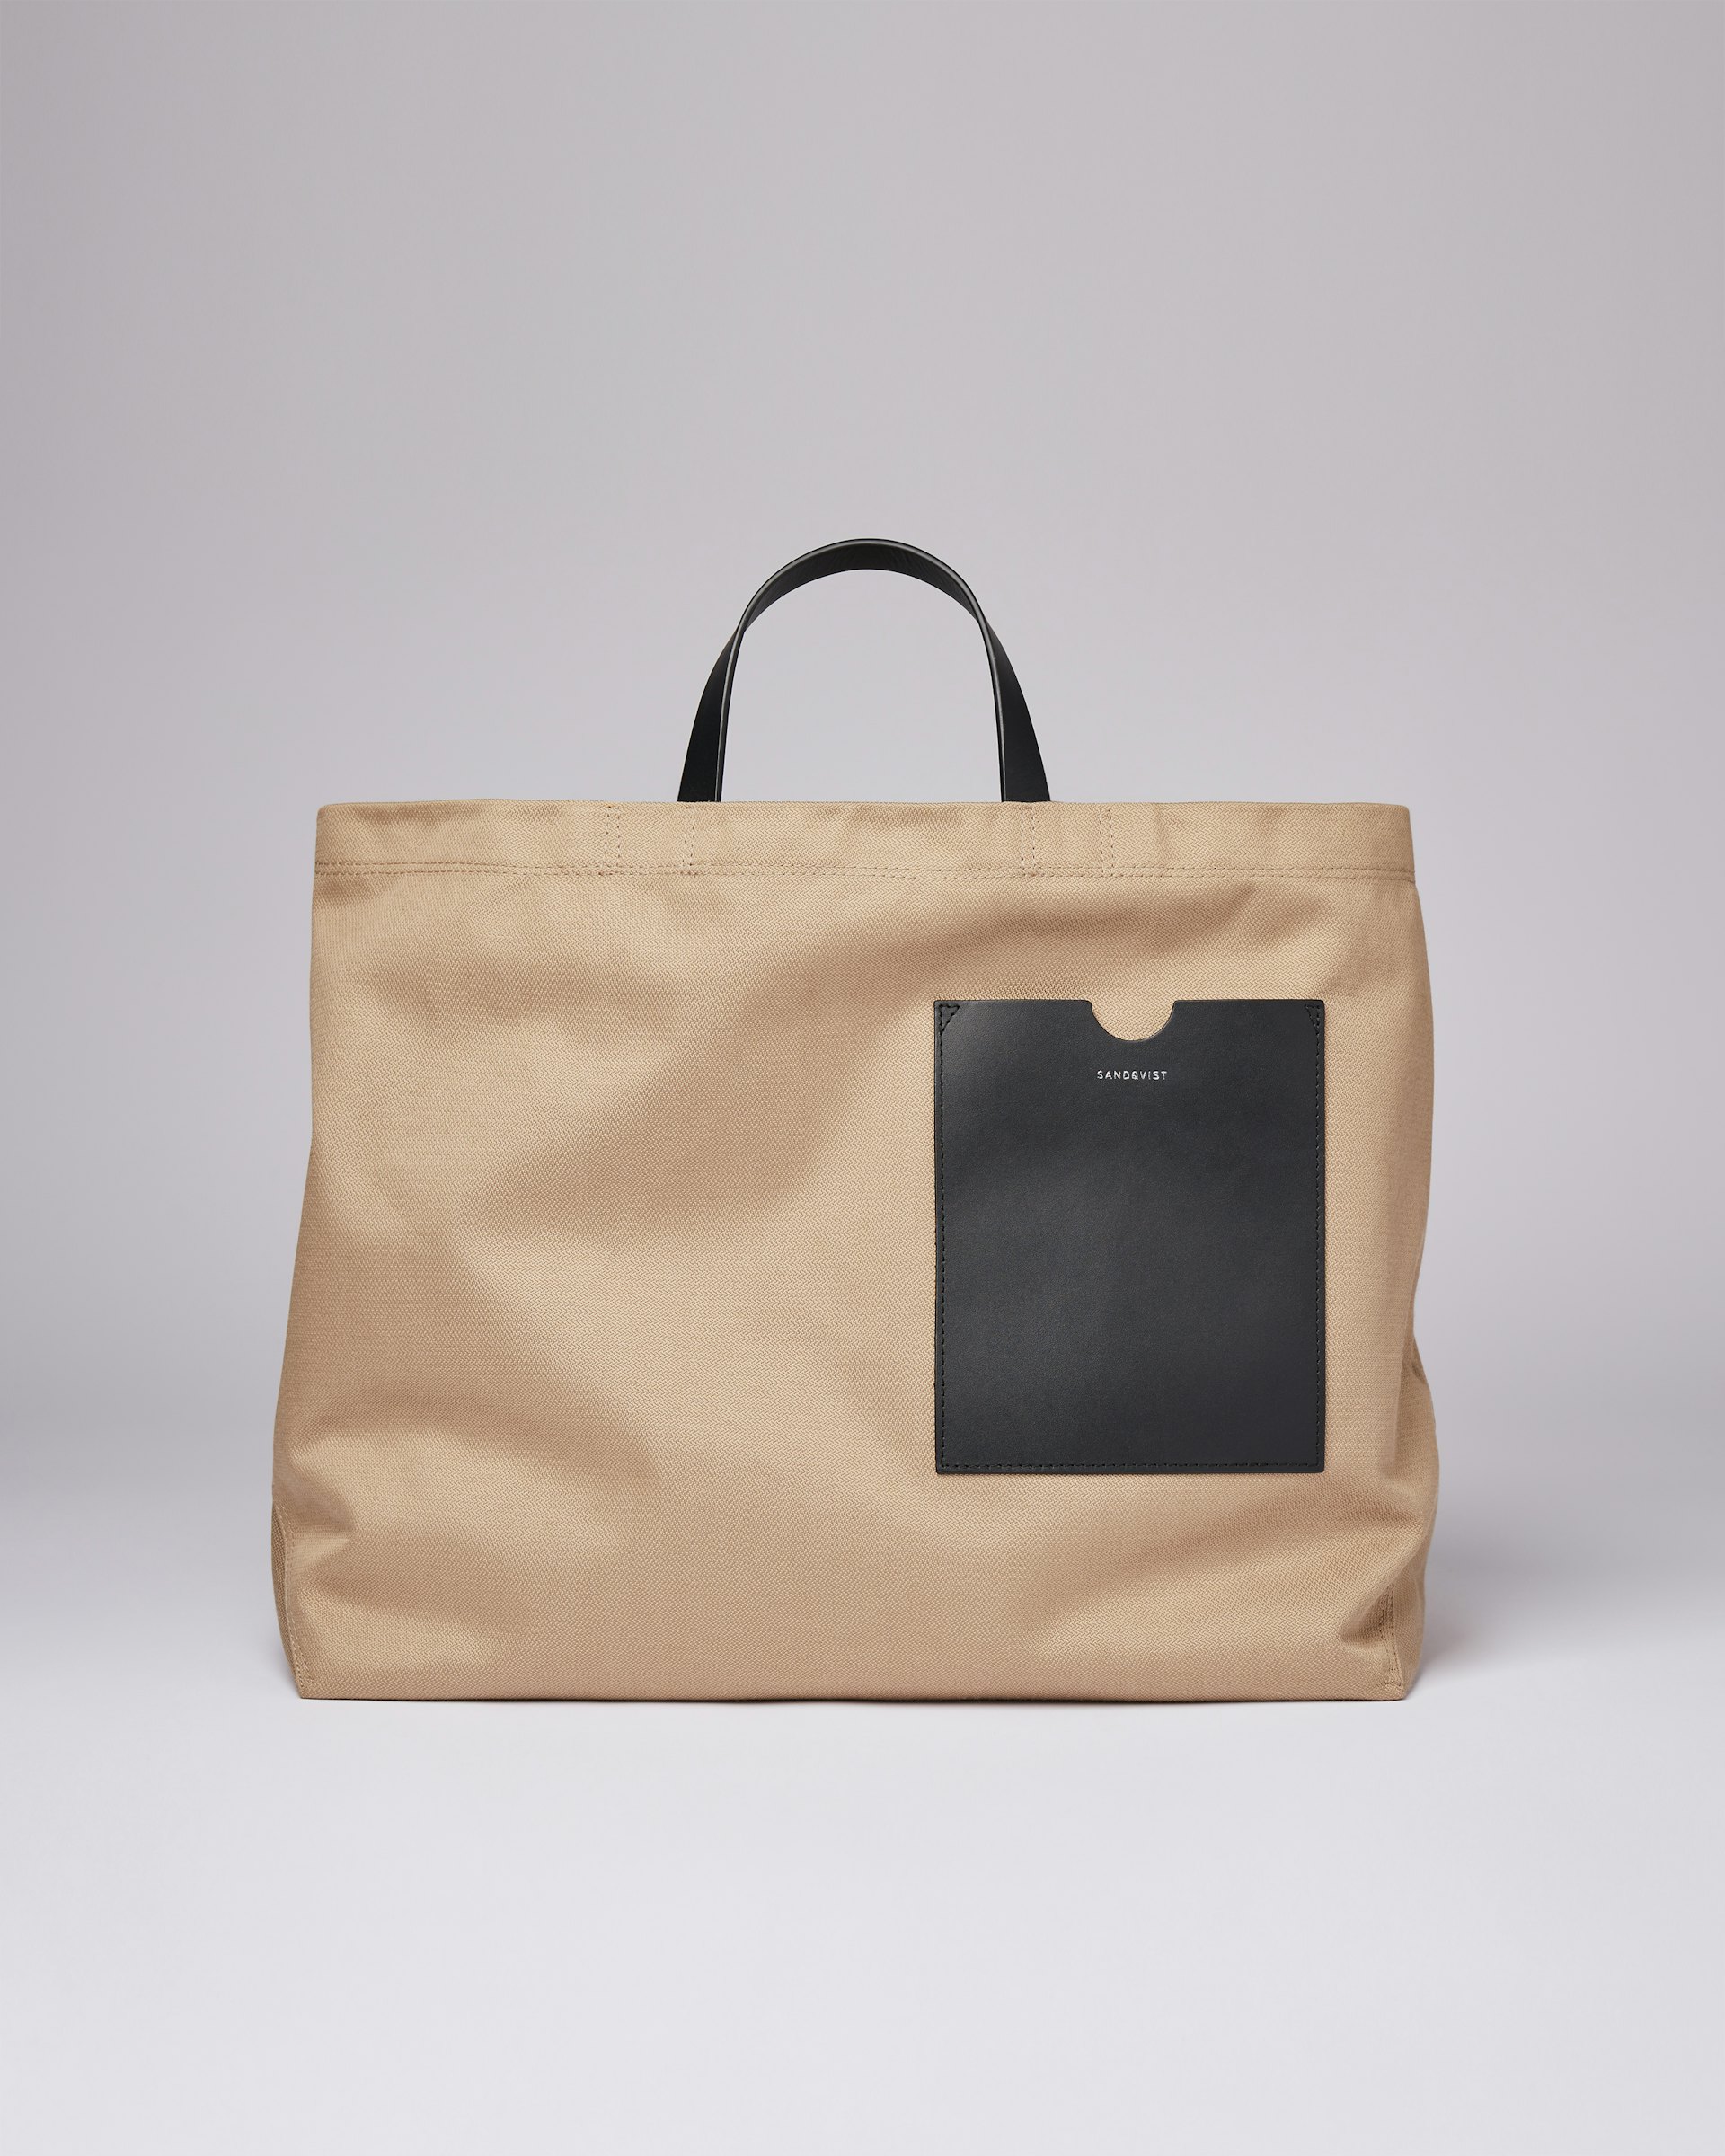 Agnes belongs to the category Tote bags and is in color svart